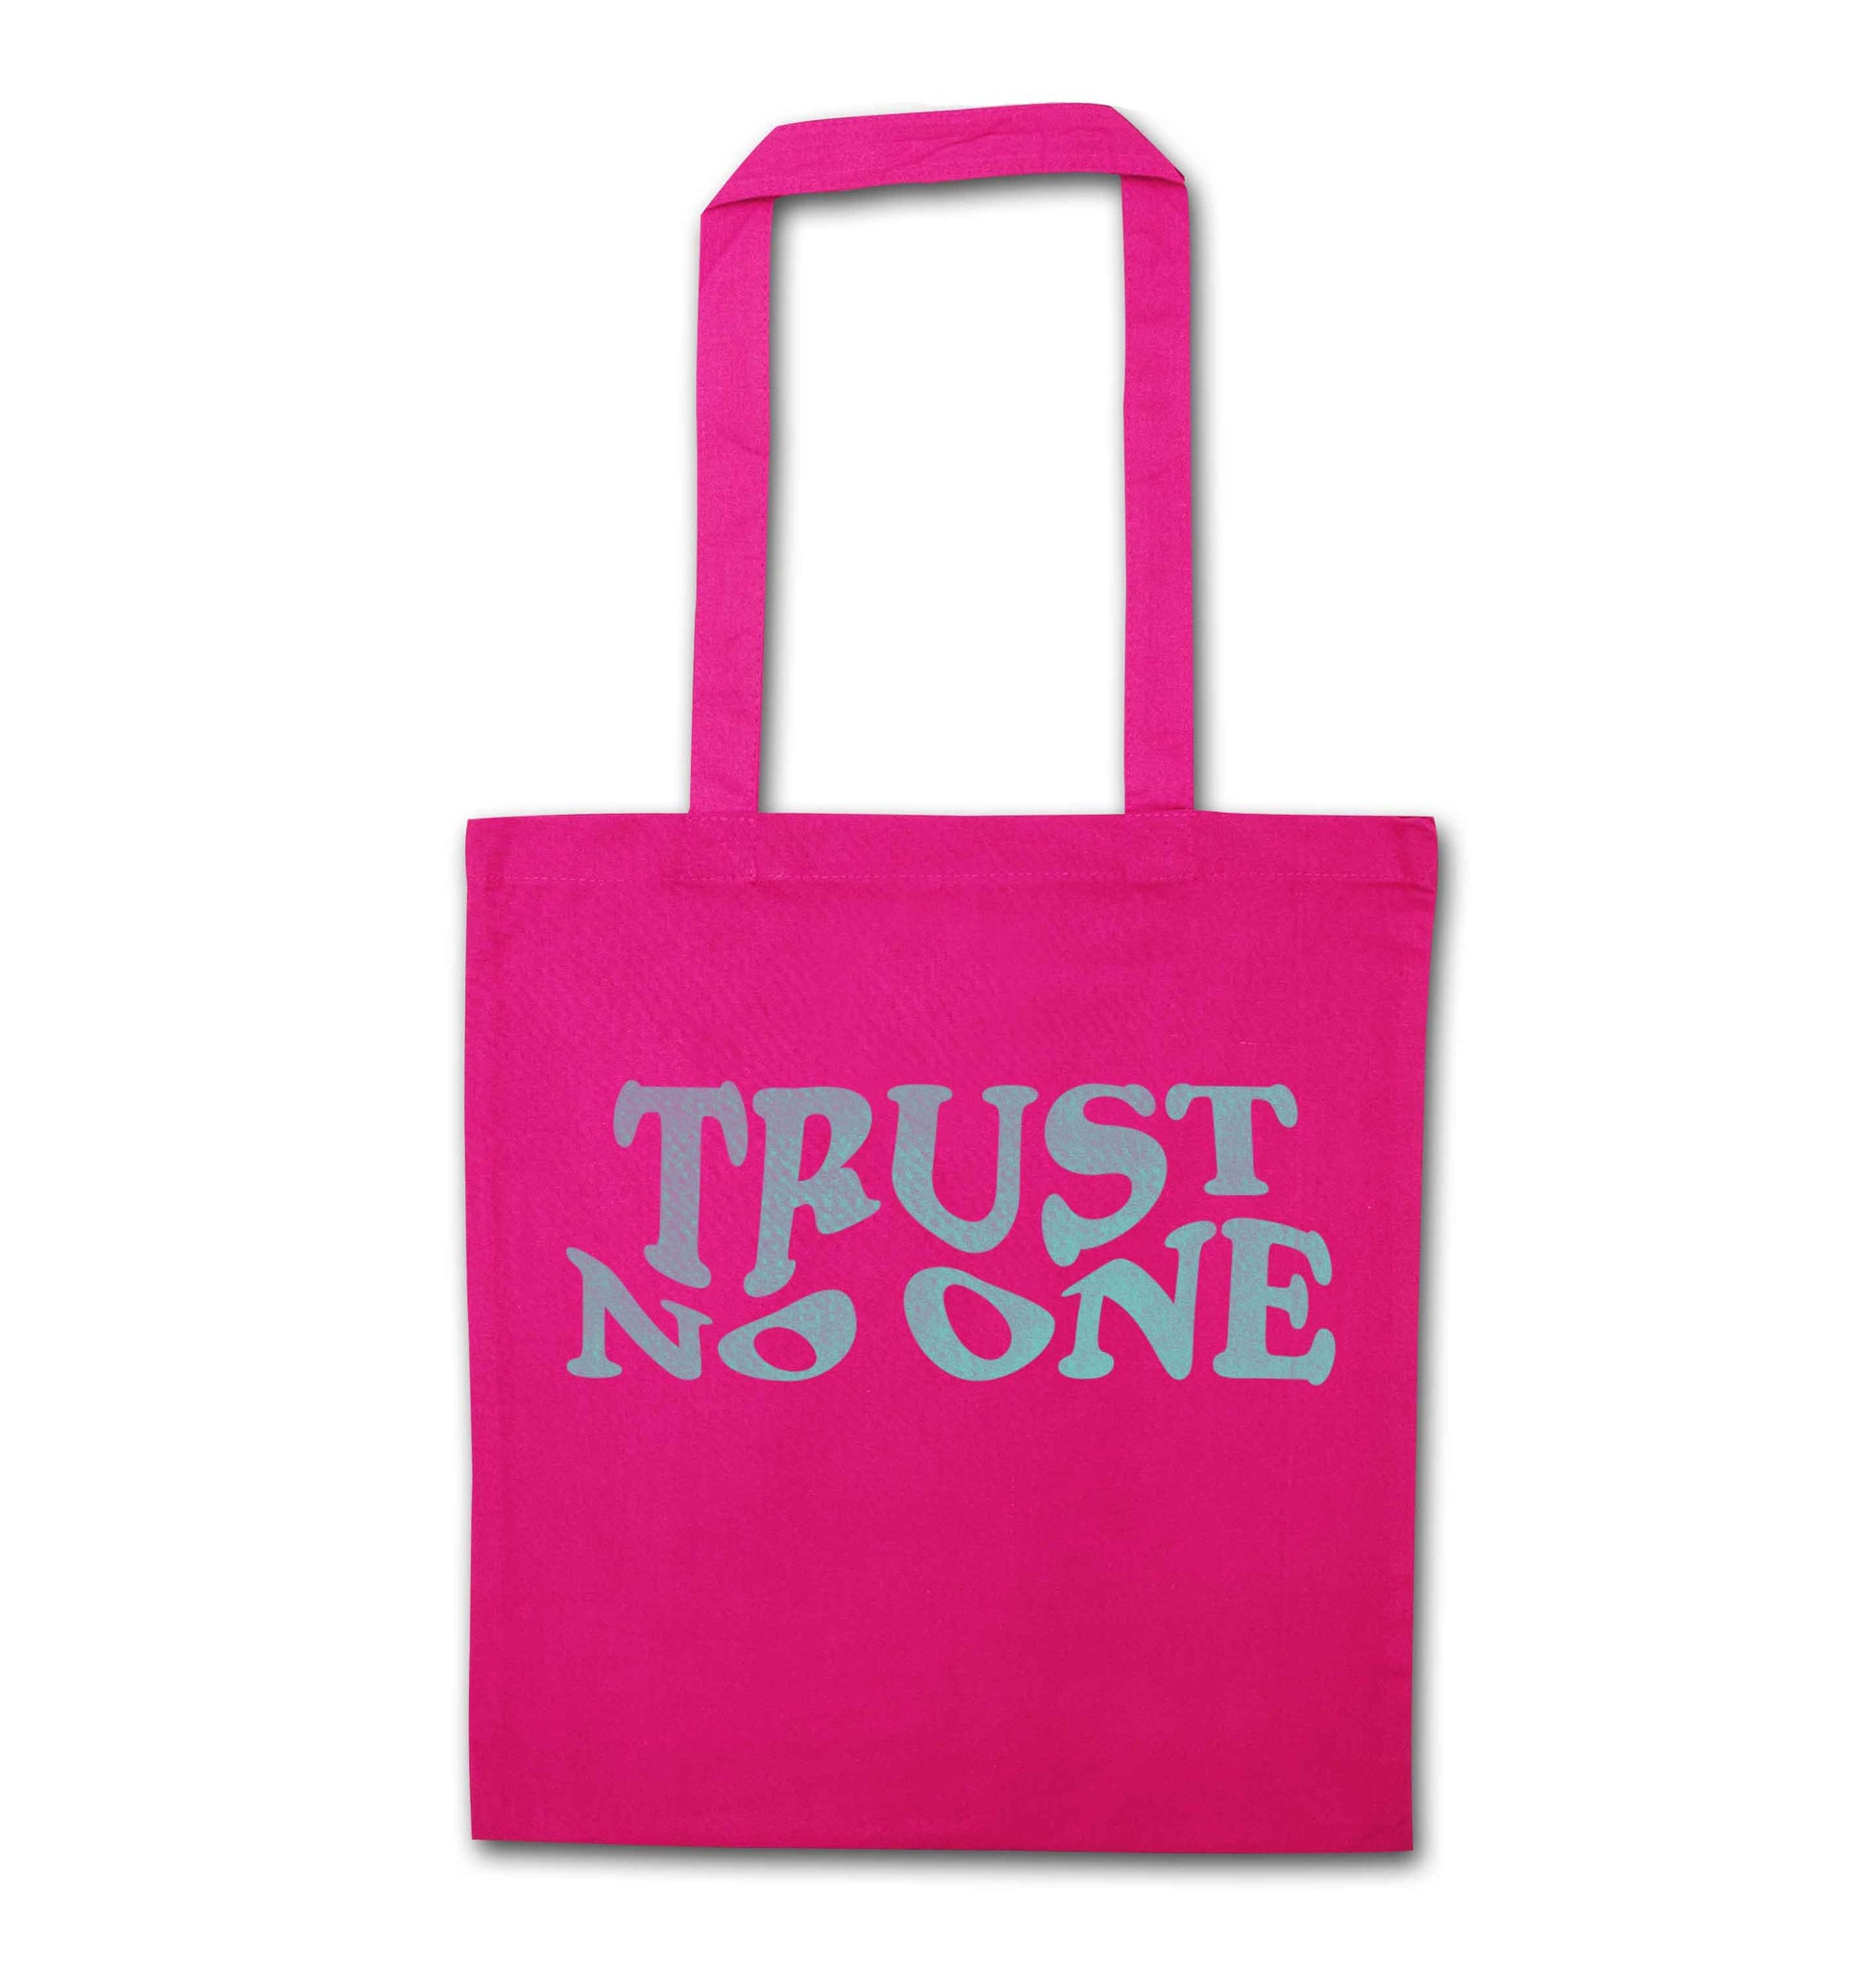 Trust no one pink tote bag